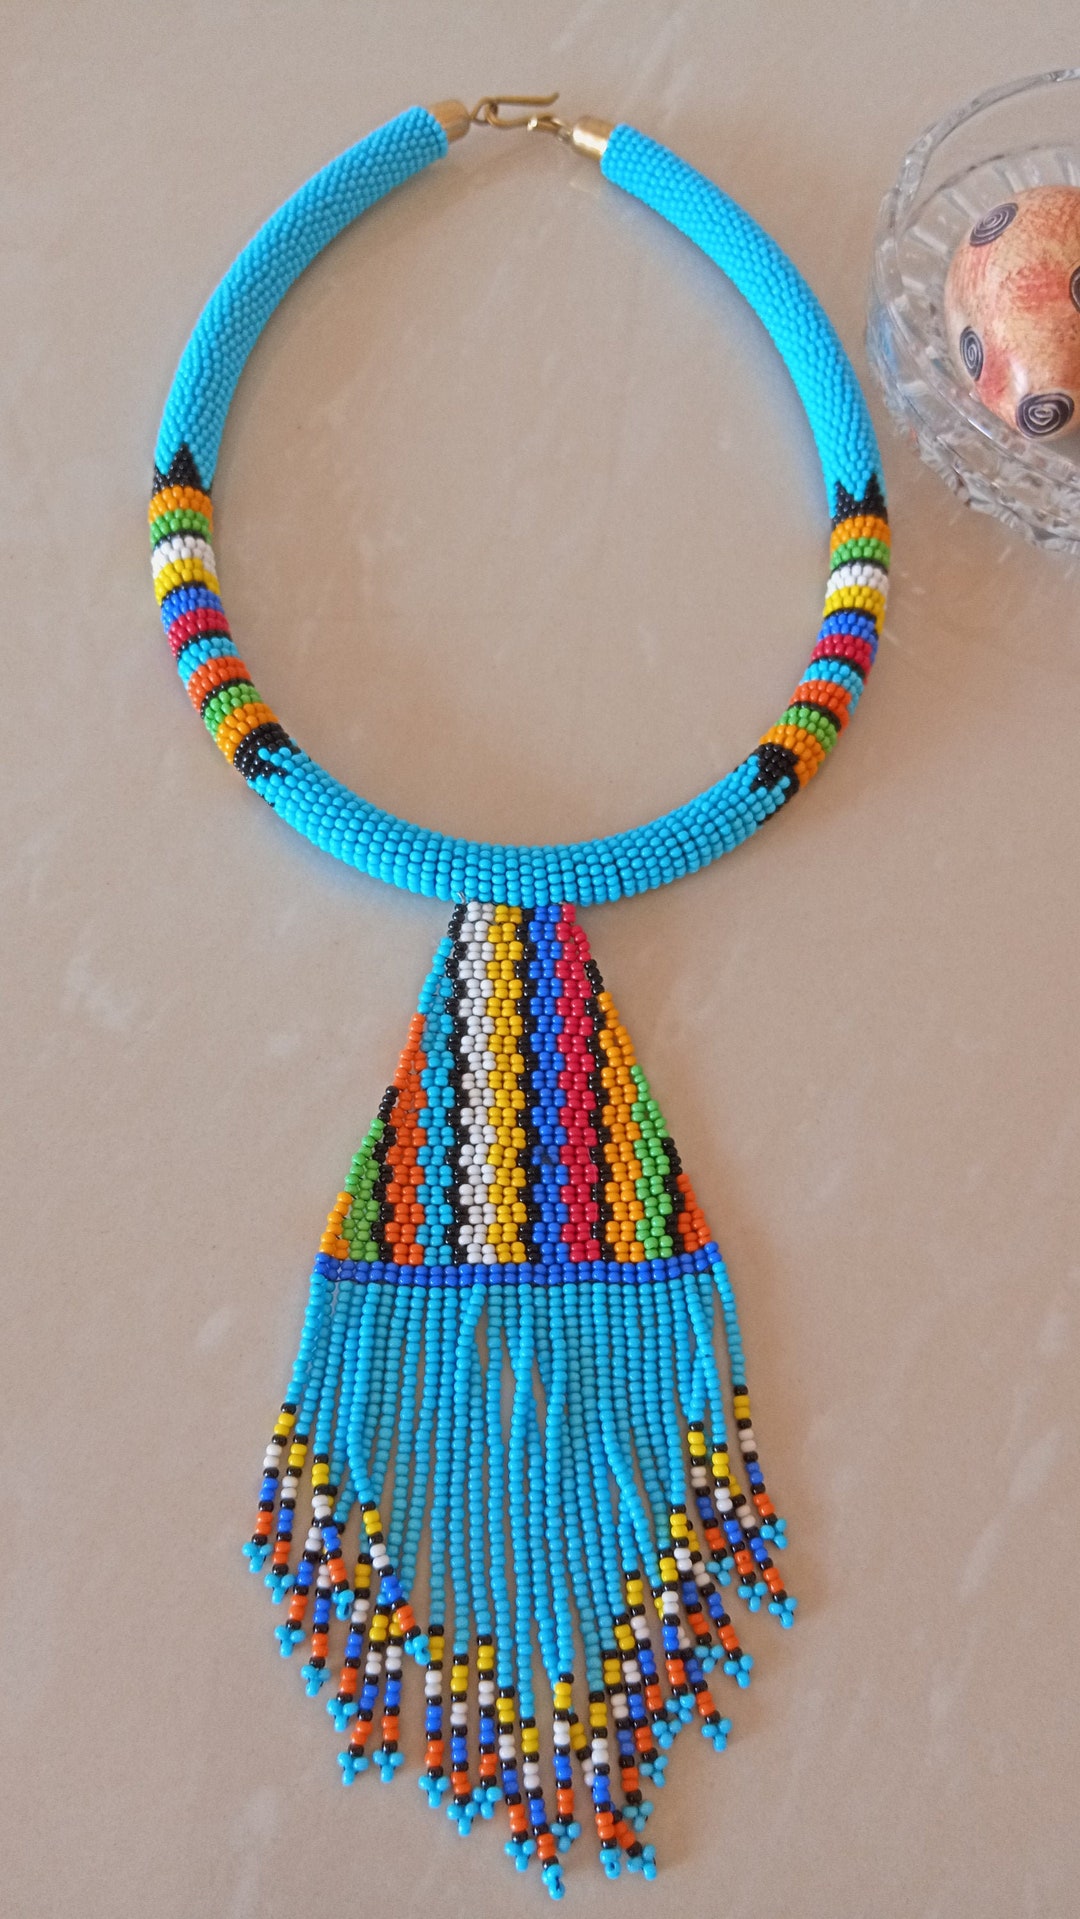 ON SALE Light Blue Beaded Necklace African Jewelry Maasai - Etsy